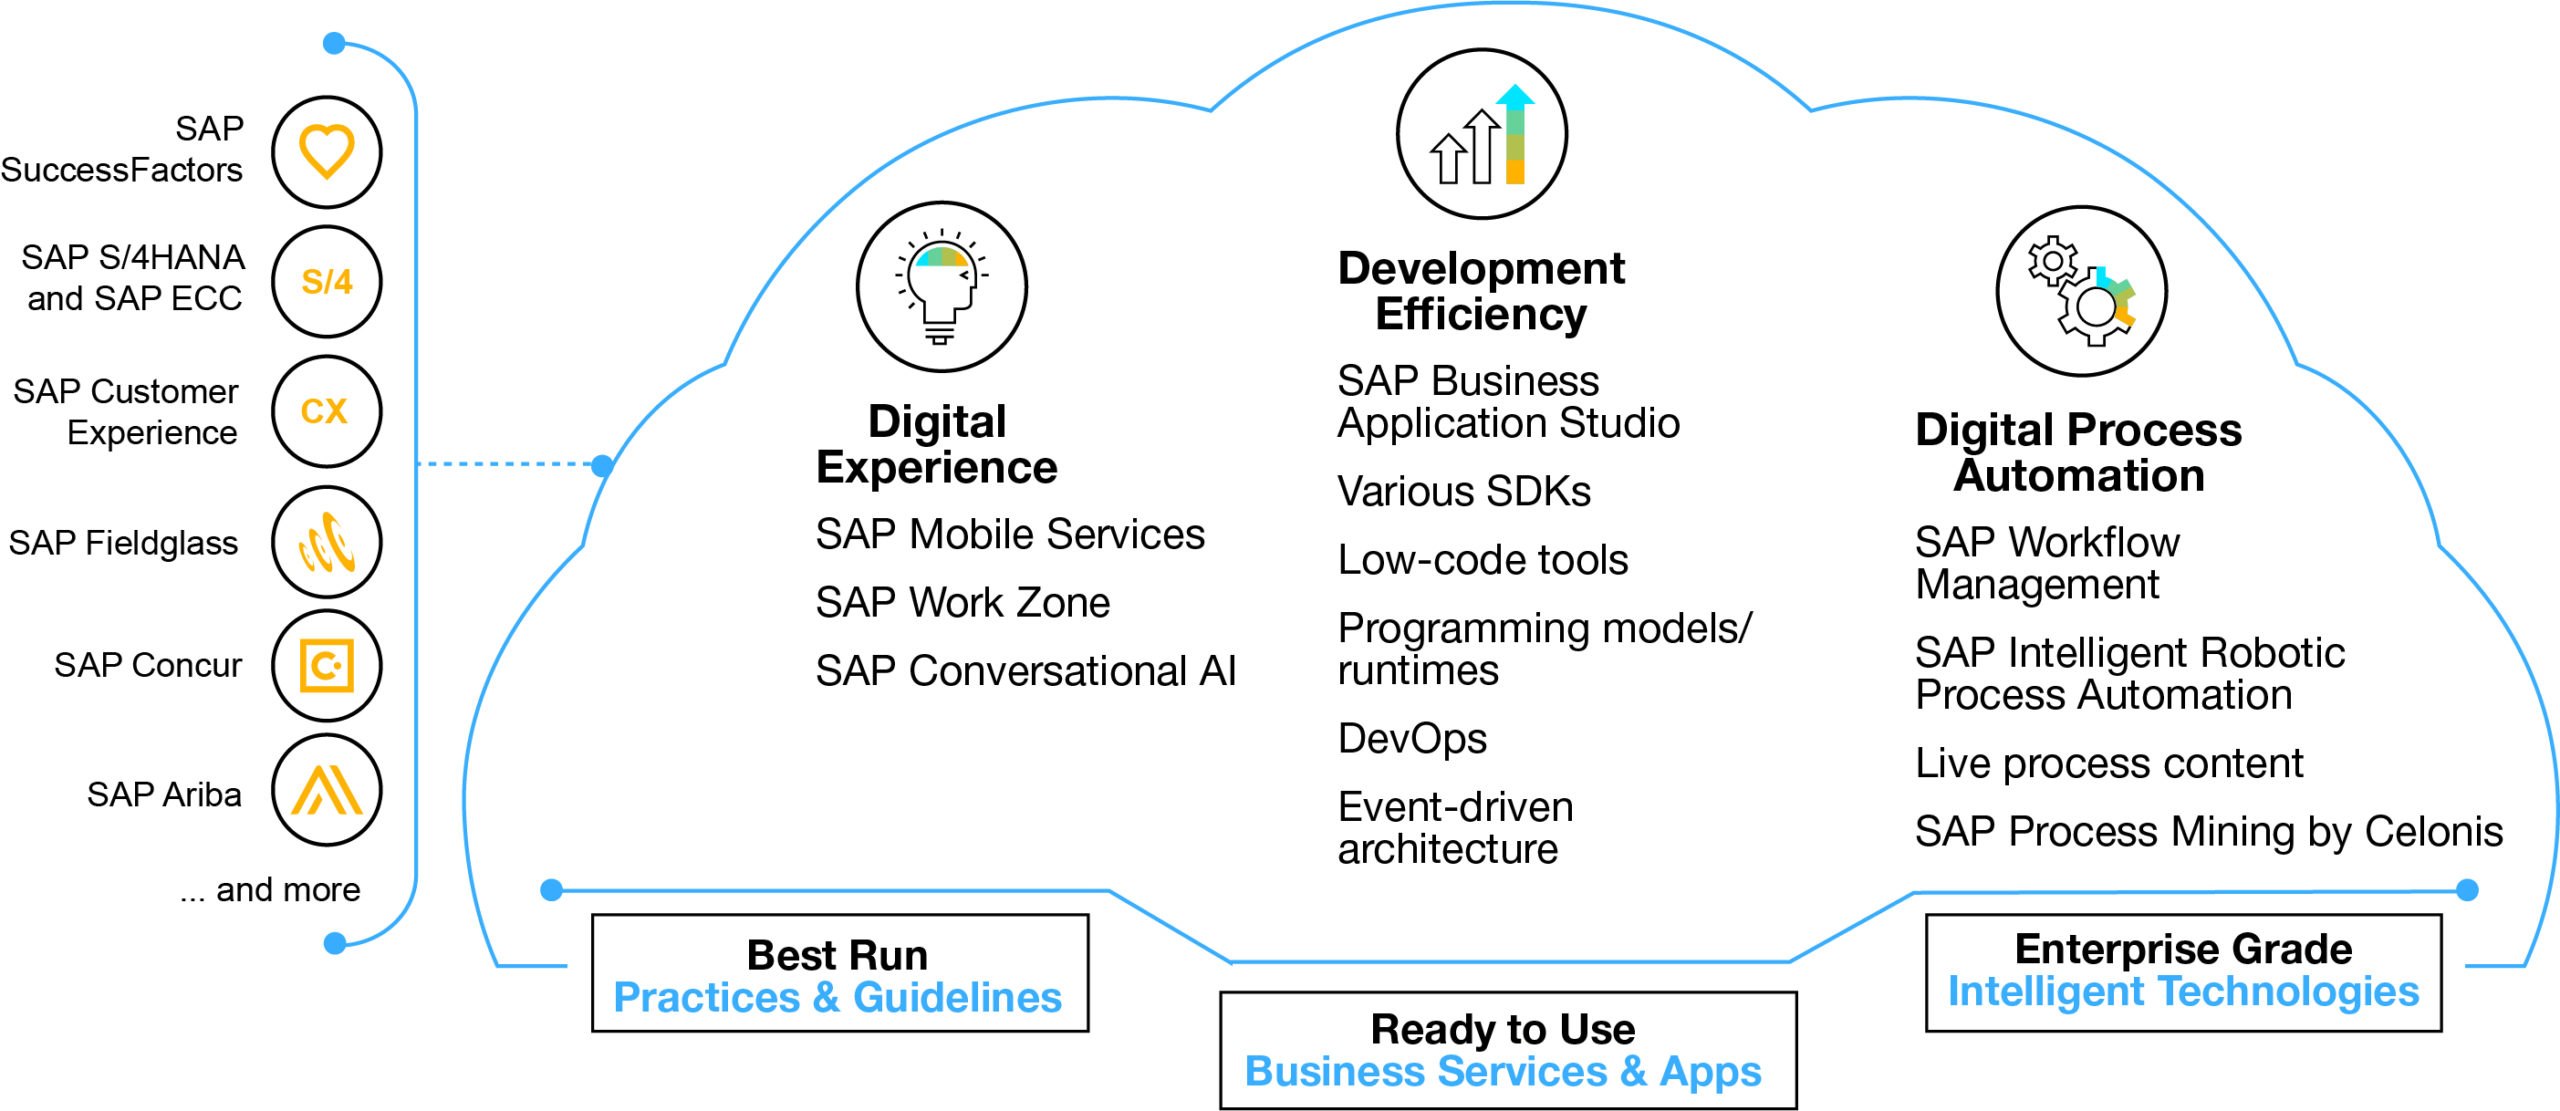 Figure 1 — SAP Extension Suite comprises digital experience, development efficiency, and digital process automation tools and services that simplify the development of application extensions